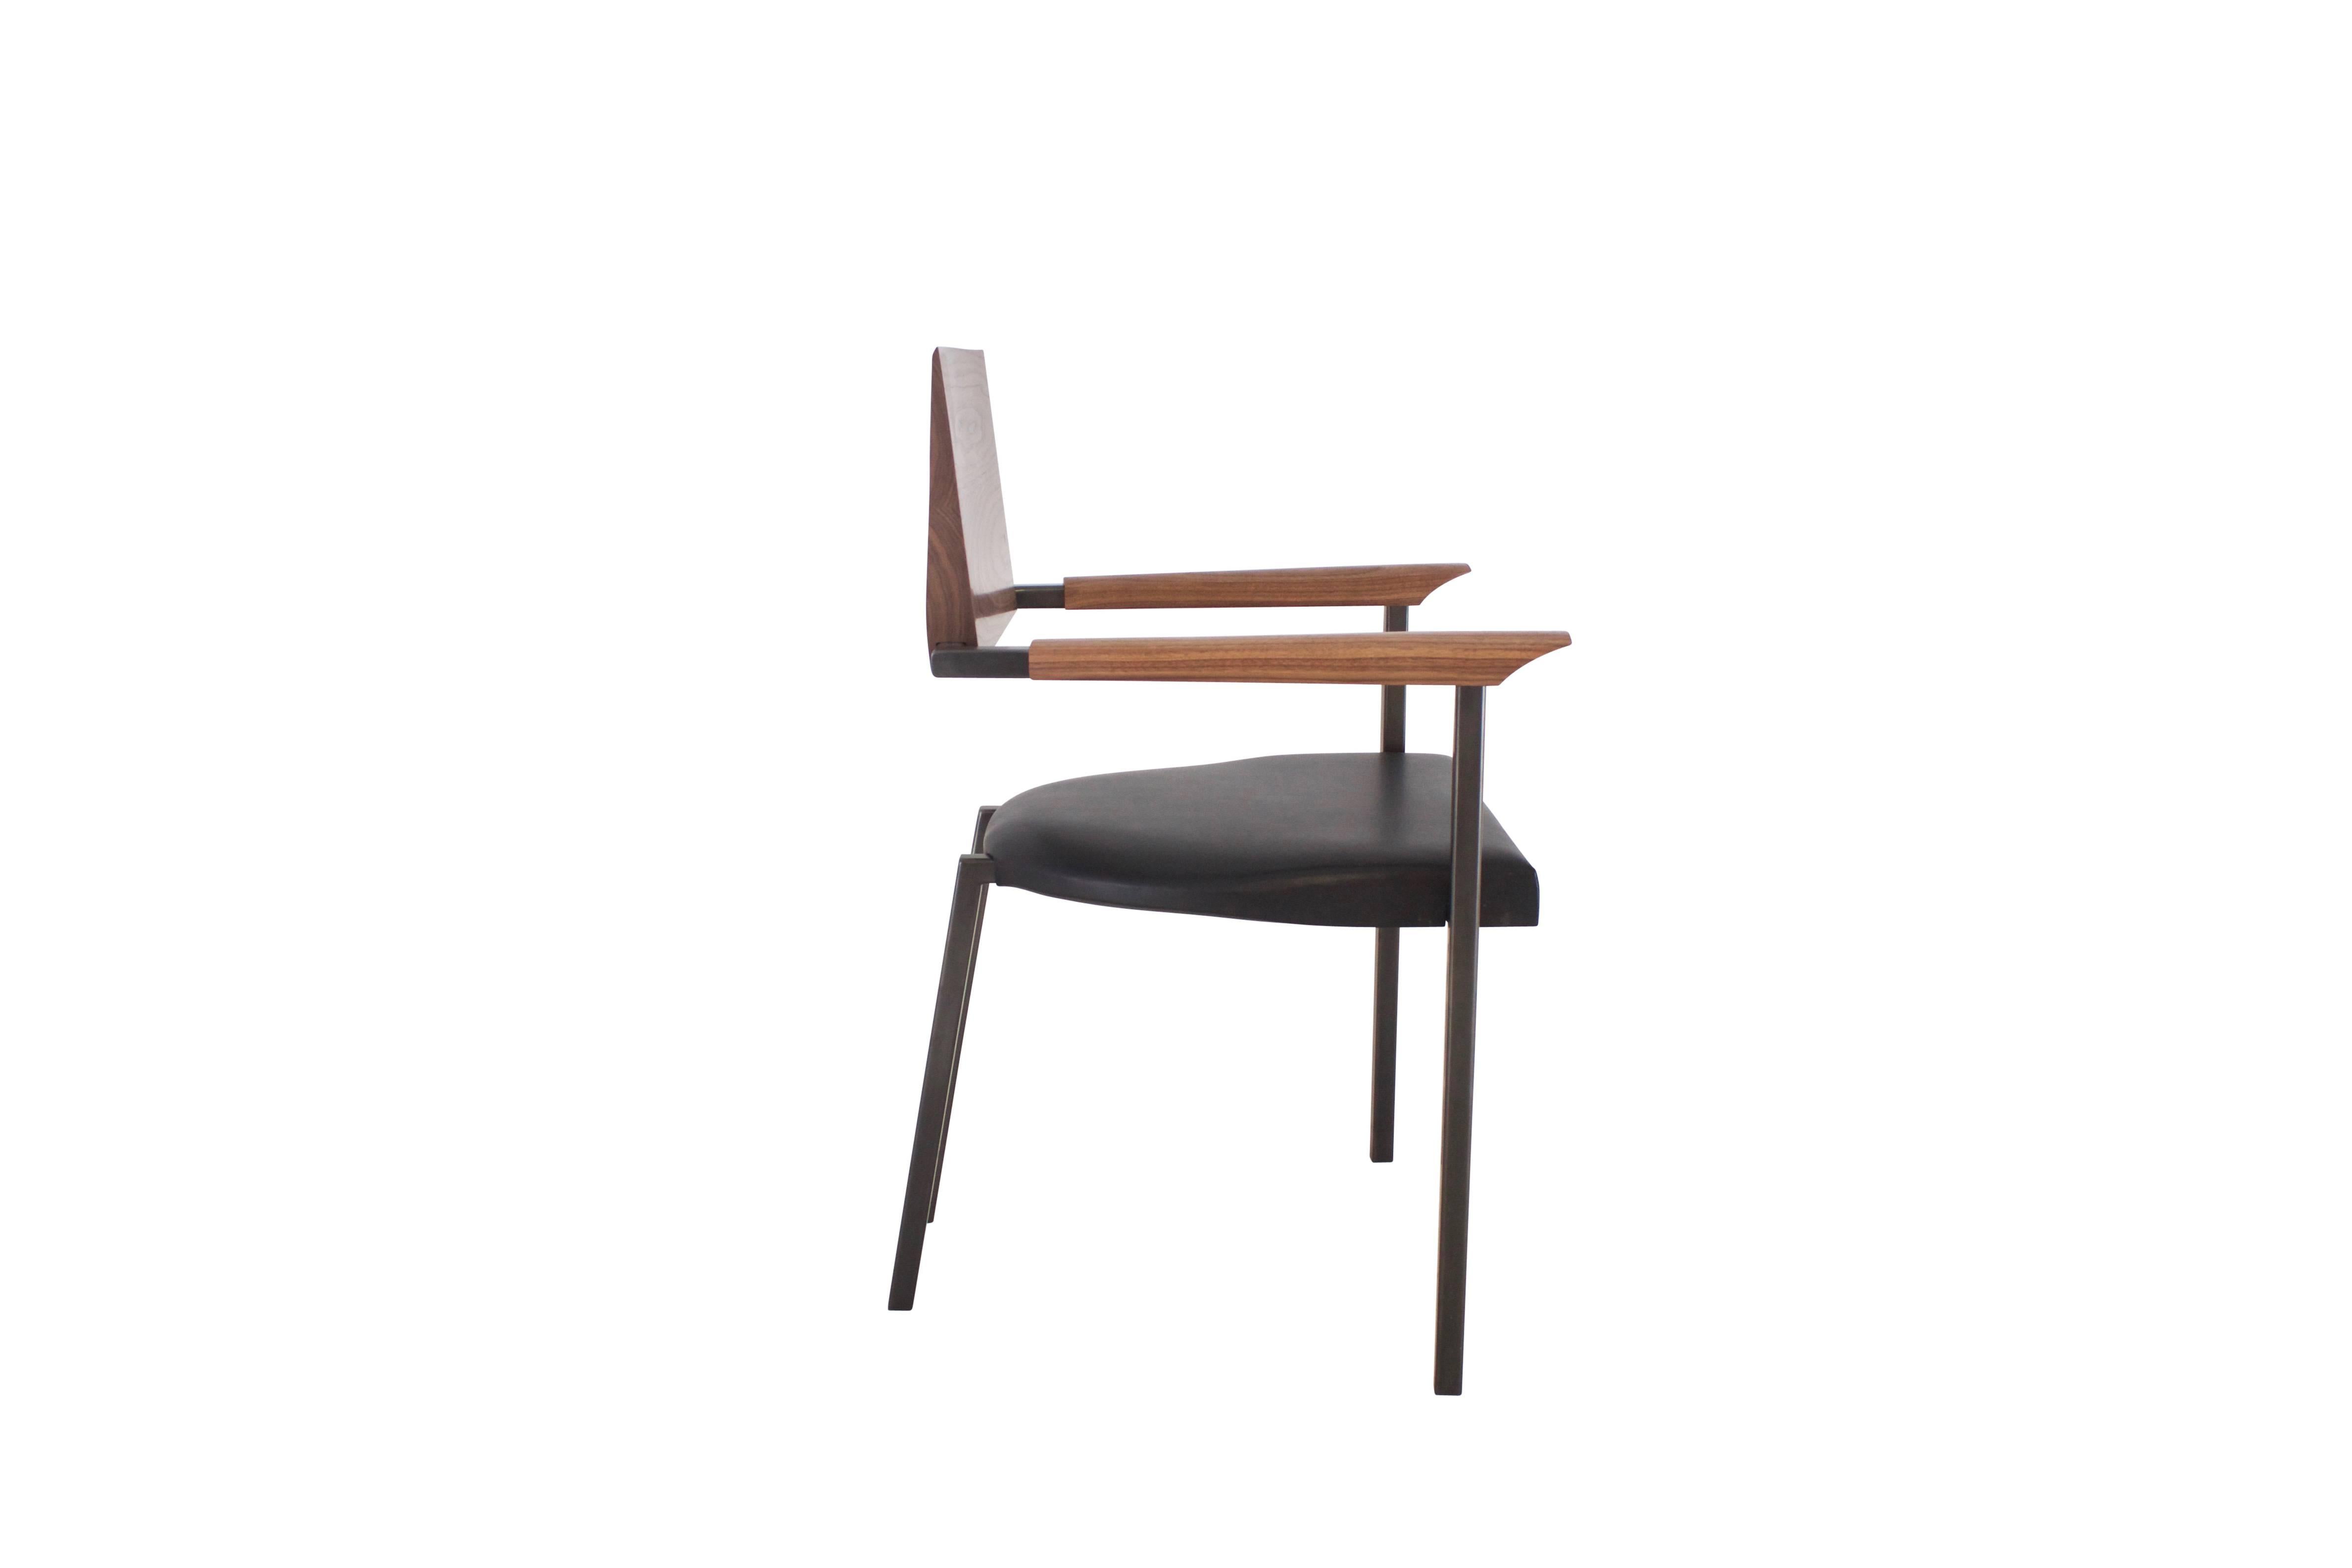 This chair evokes a feeling of solidity, weight and forward movement. Notable features are he 